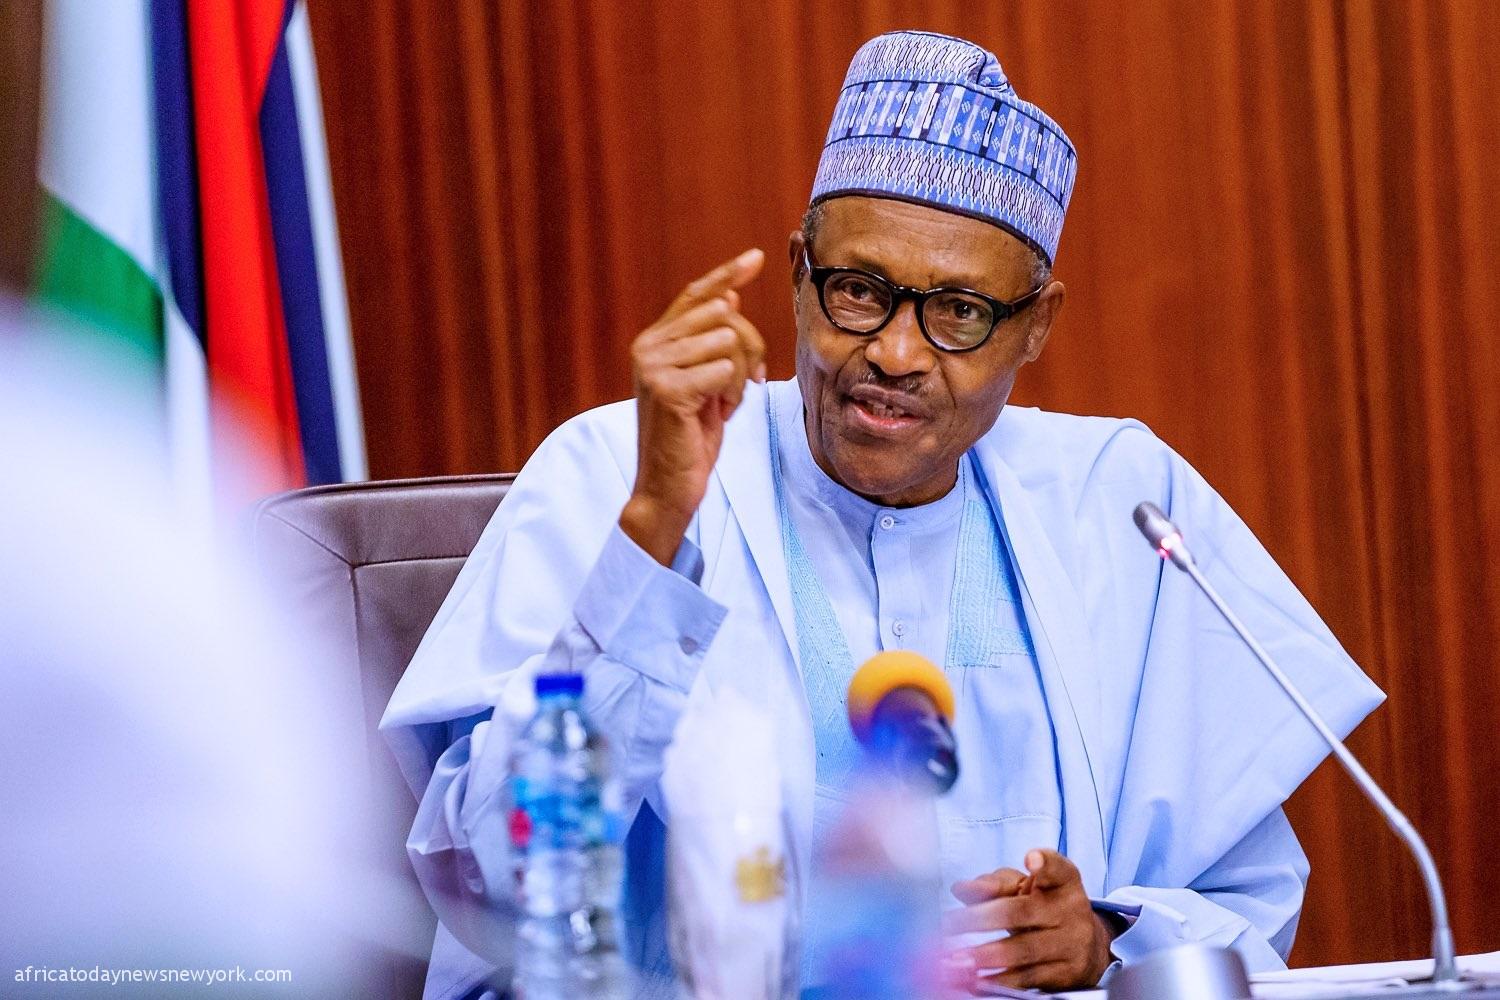 How Buhari Takes Decisions Without 'Cabal' – Presidency